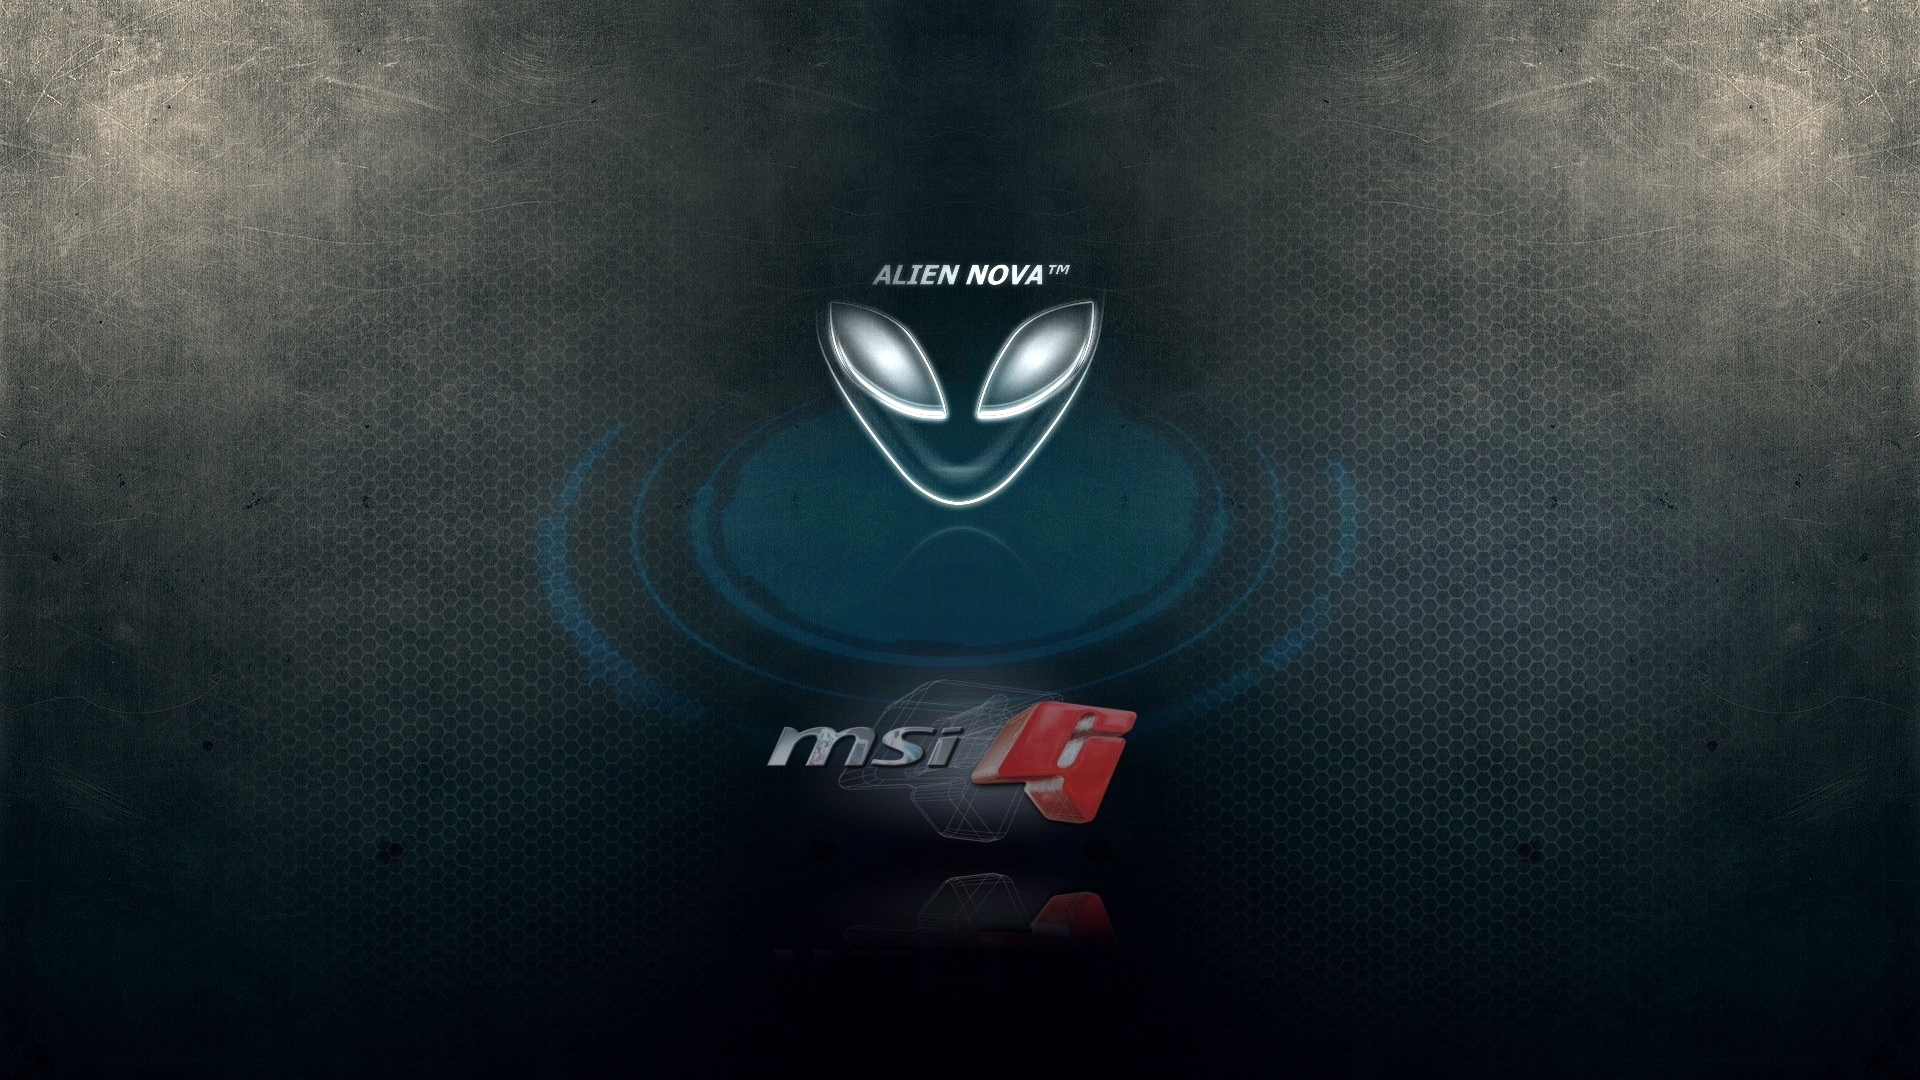 Alienware And Msi G Logo HD 1080p Wallpaper Patible For